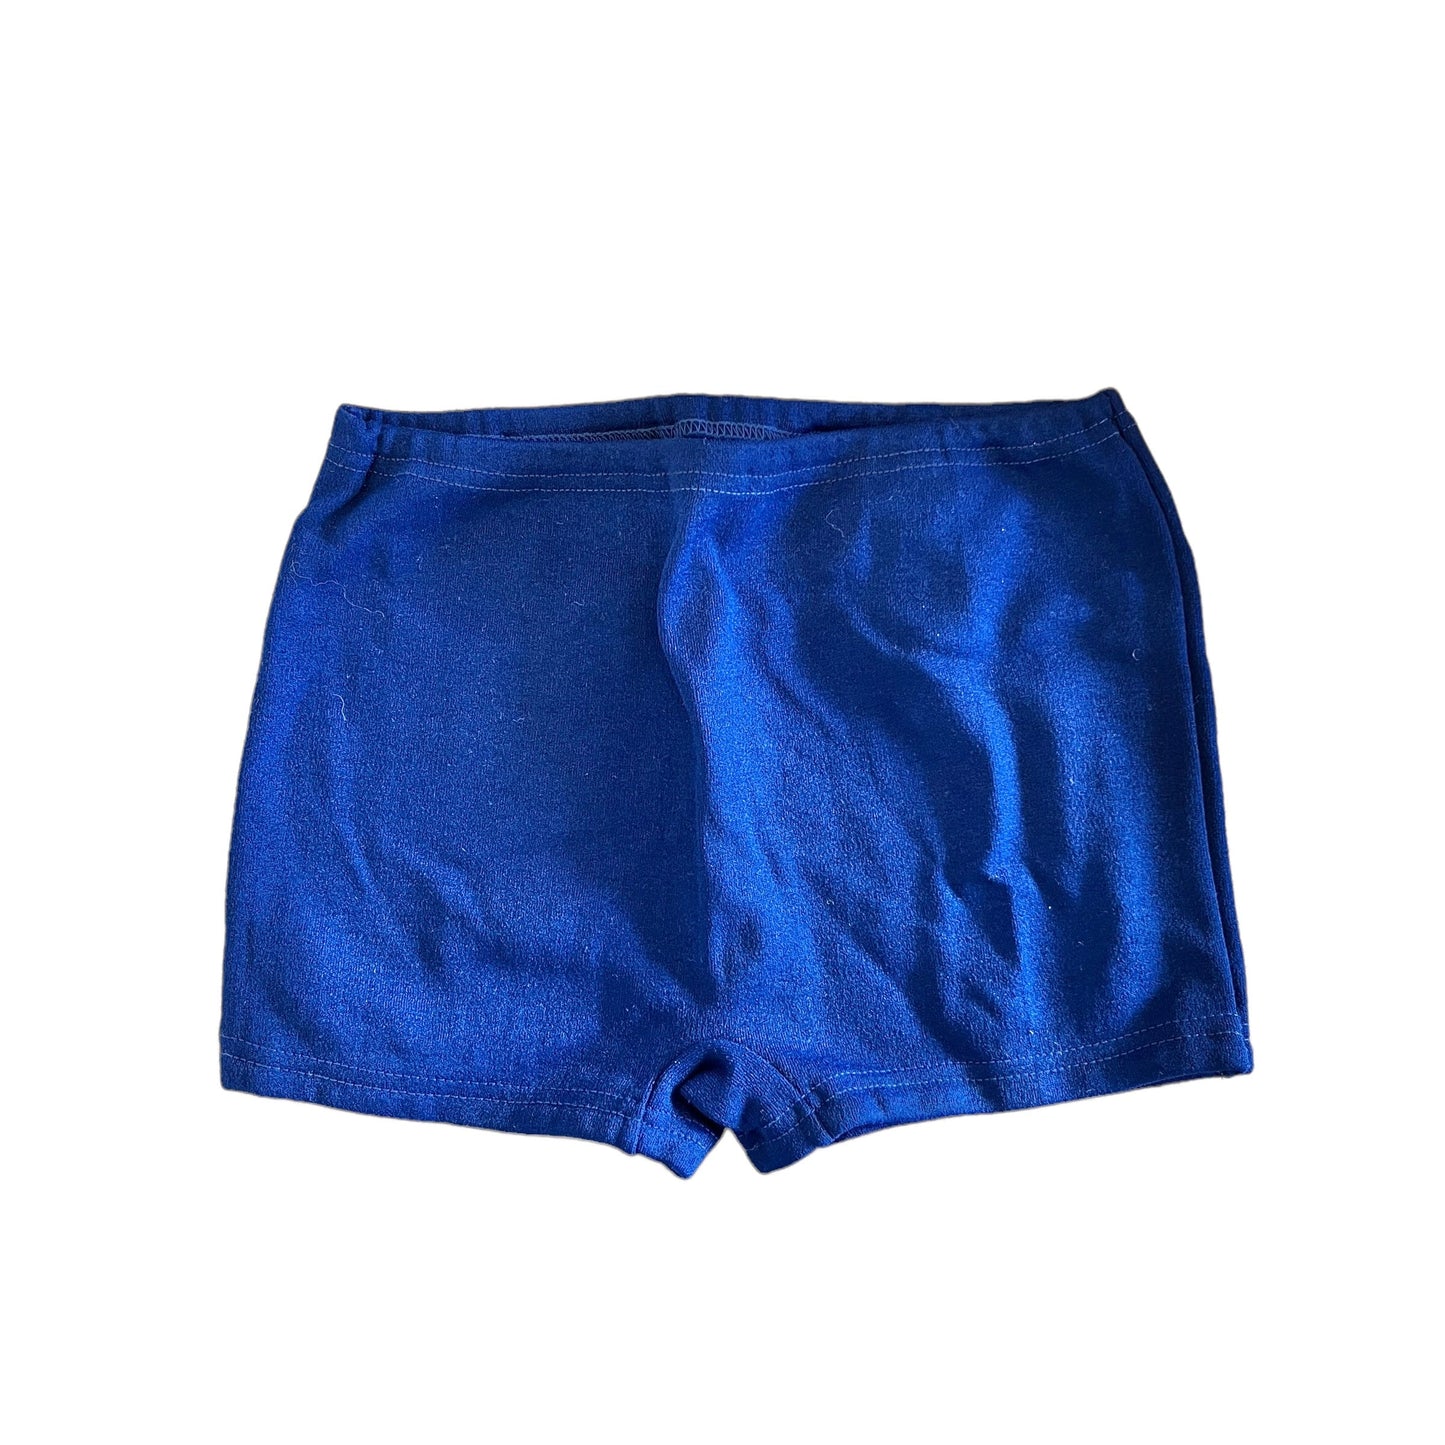 Vintage 70's Navy Swimming Trunks / Shorts  6-8 Years